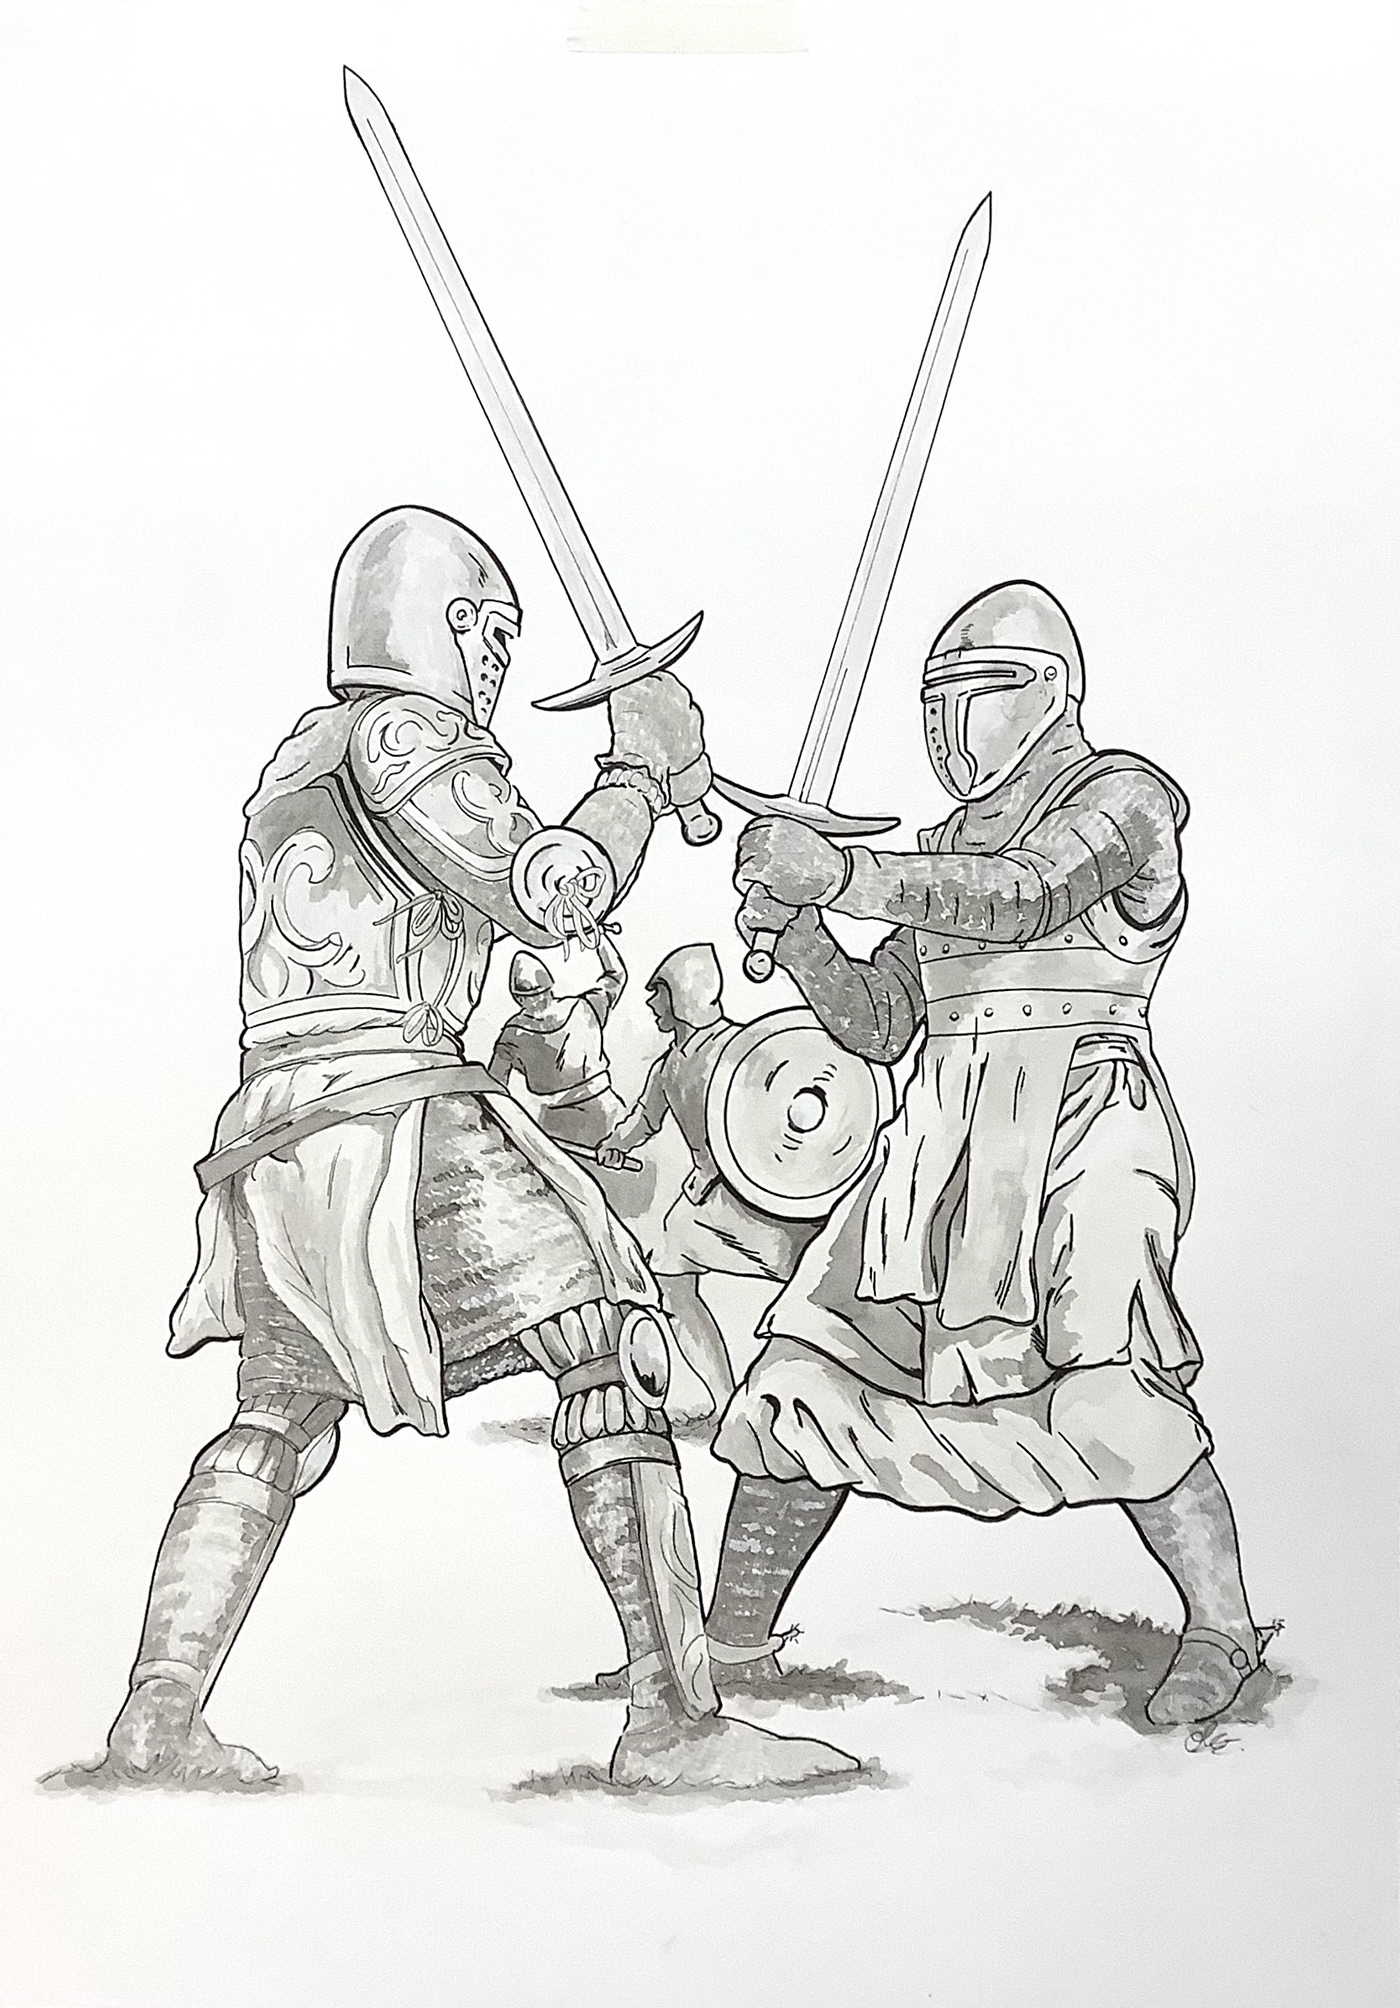 duel history knights medieval Military